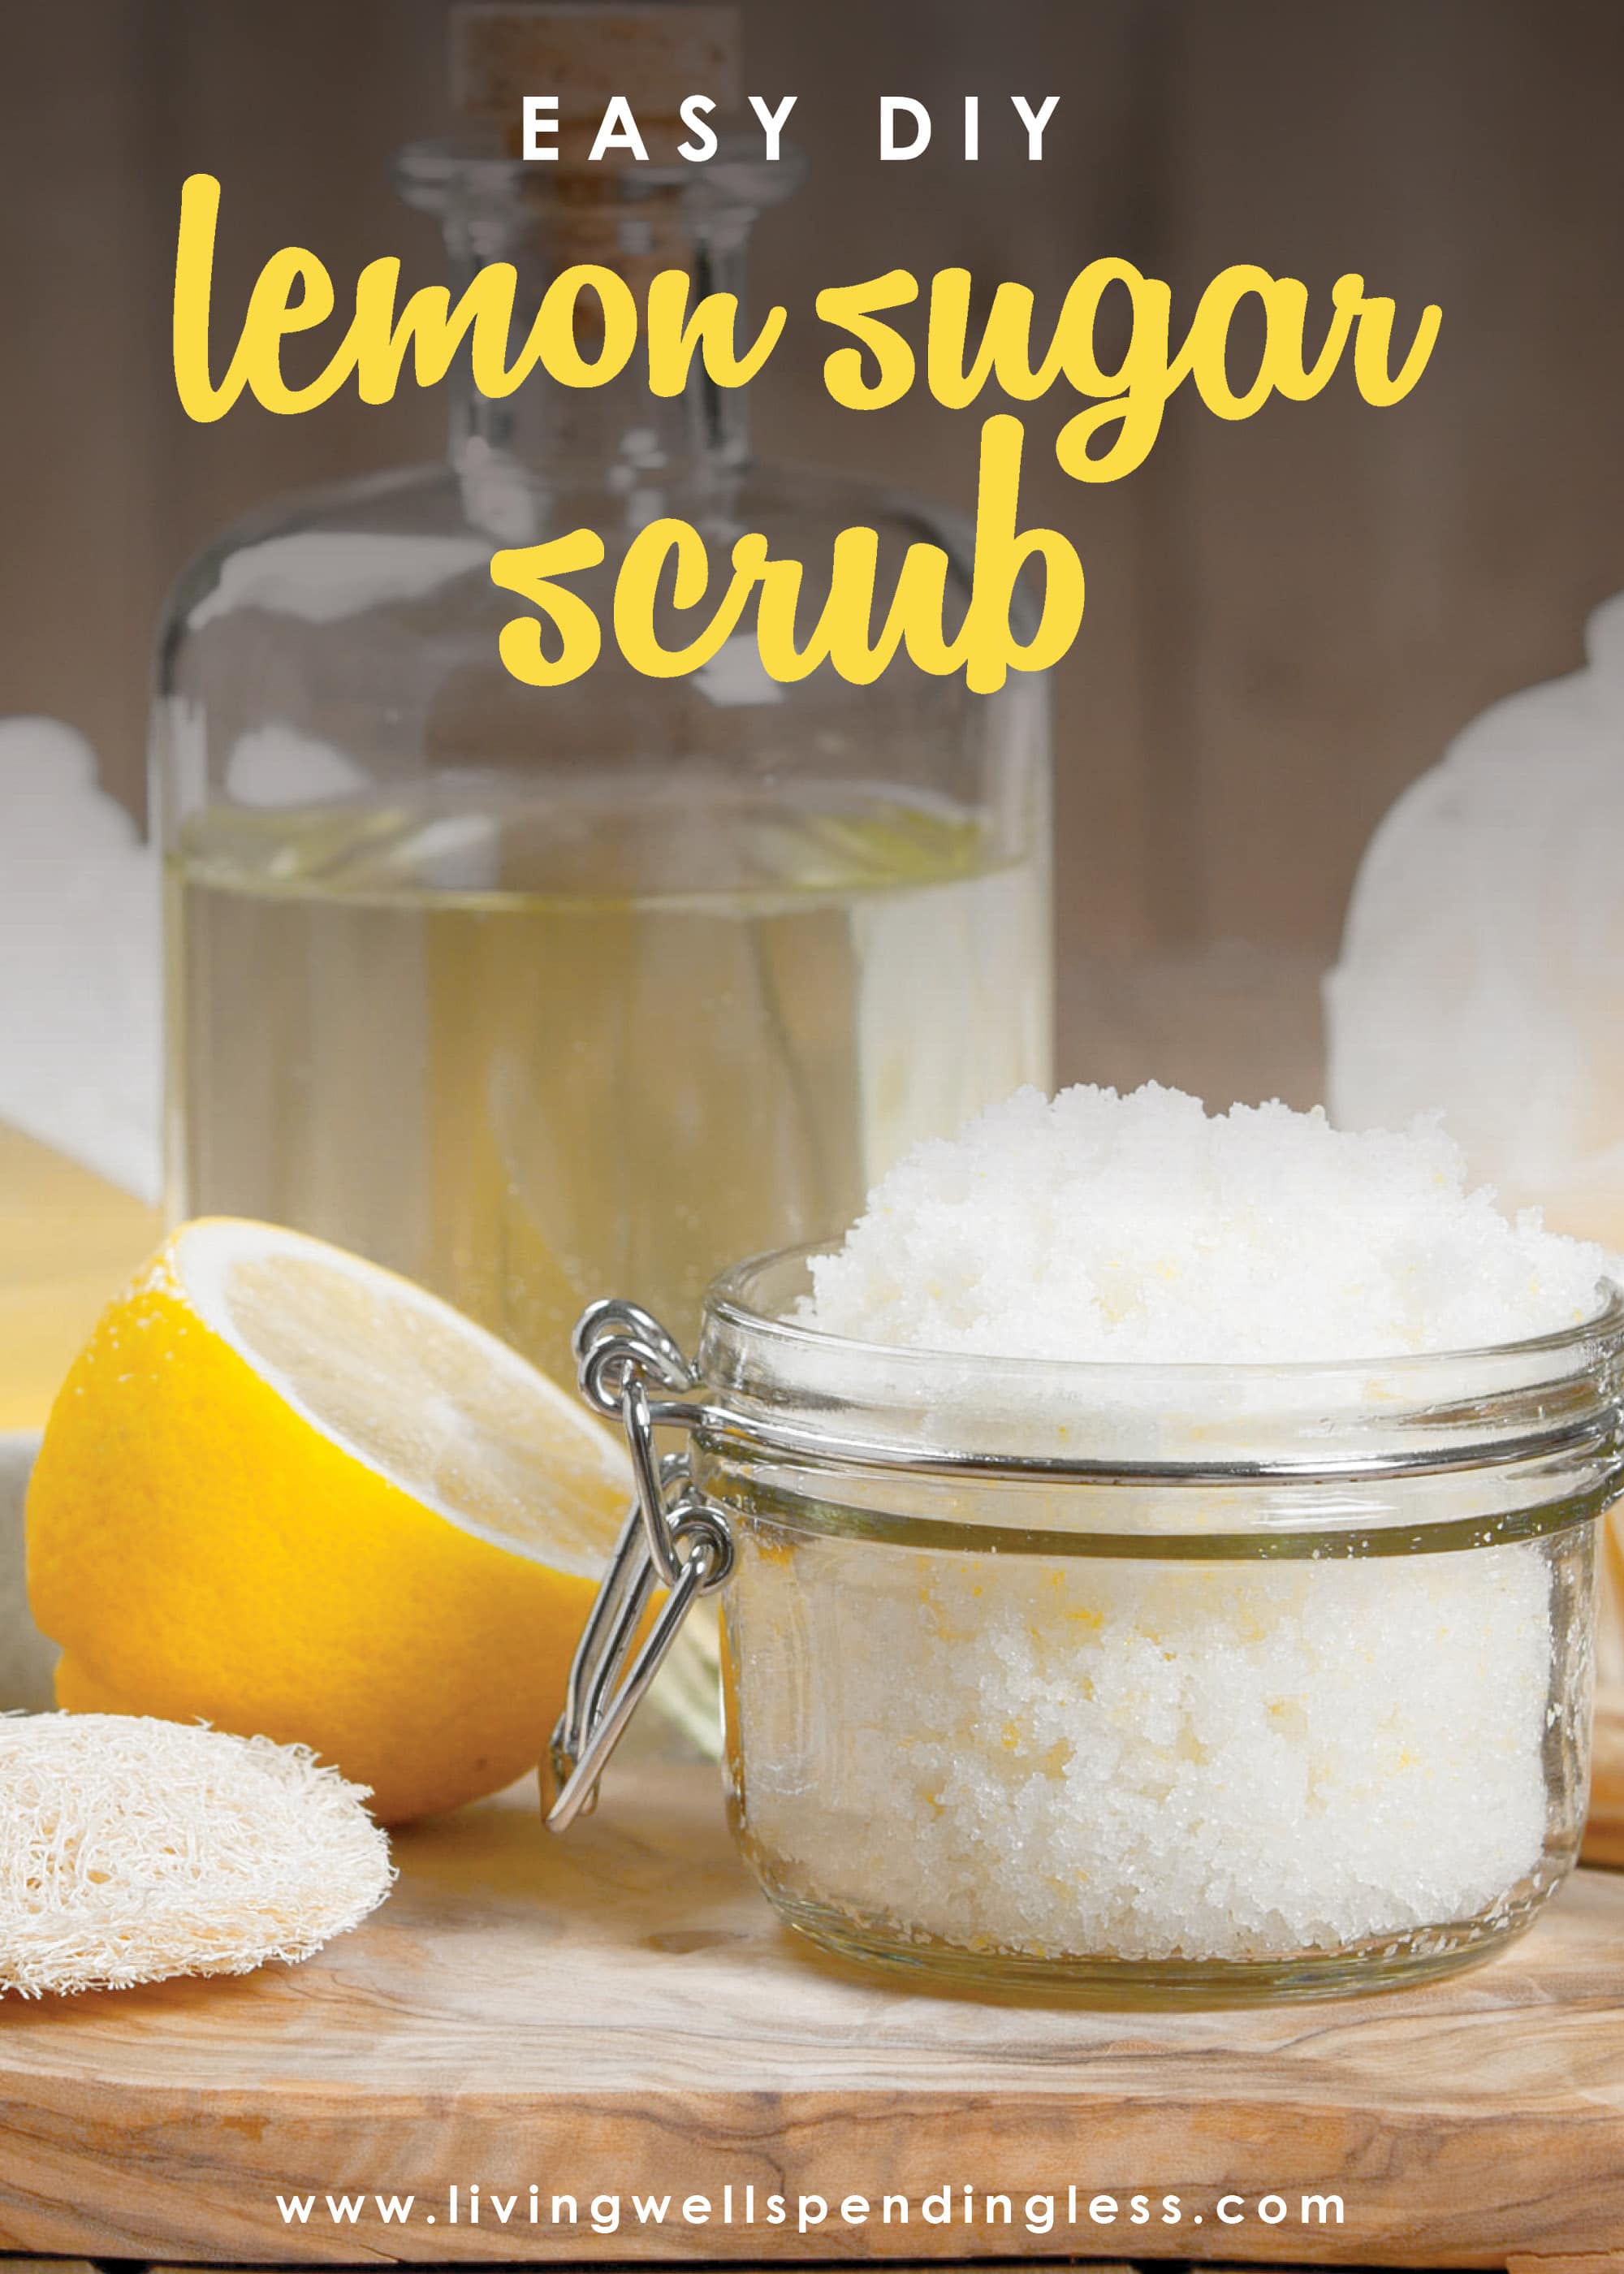 Did you know sugar contains natural alpha-hydrolic acids that exfoliate & soften your skin? Three ingredients is all you need to make this Lemon Sugar Scrub!